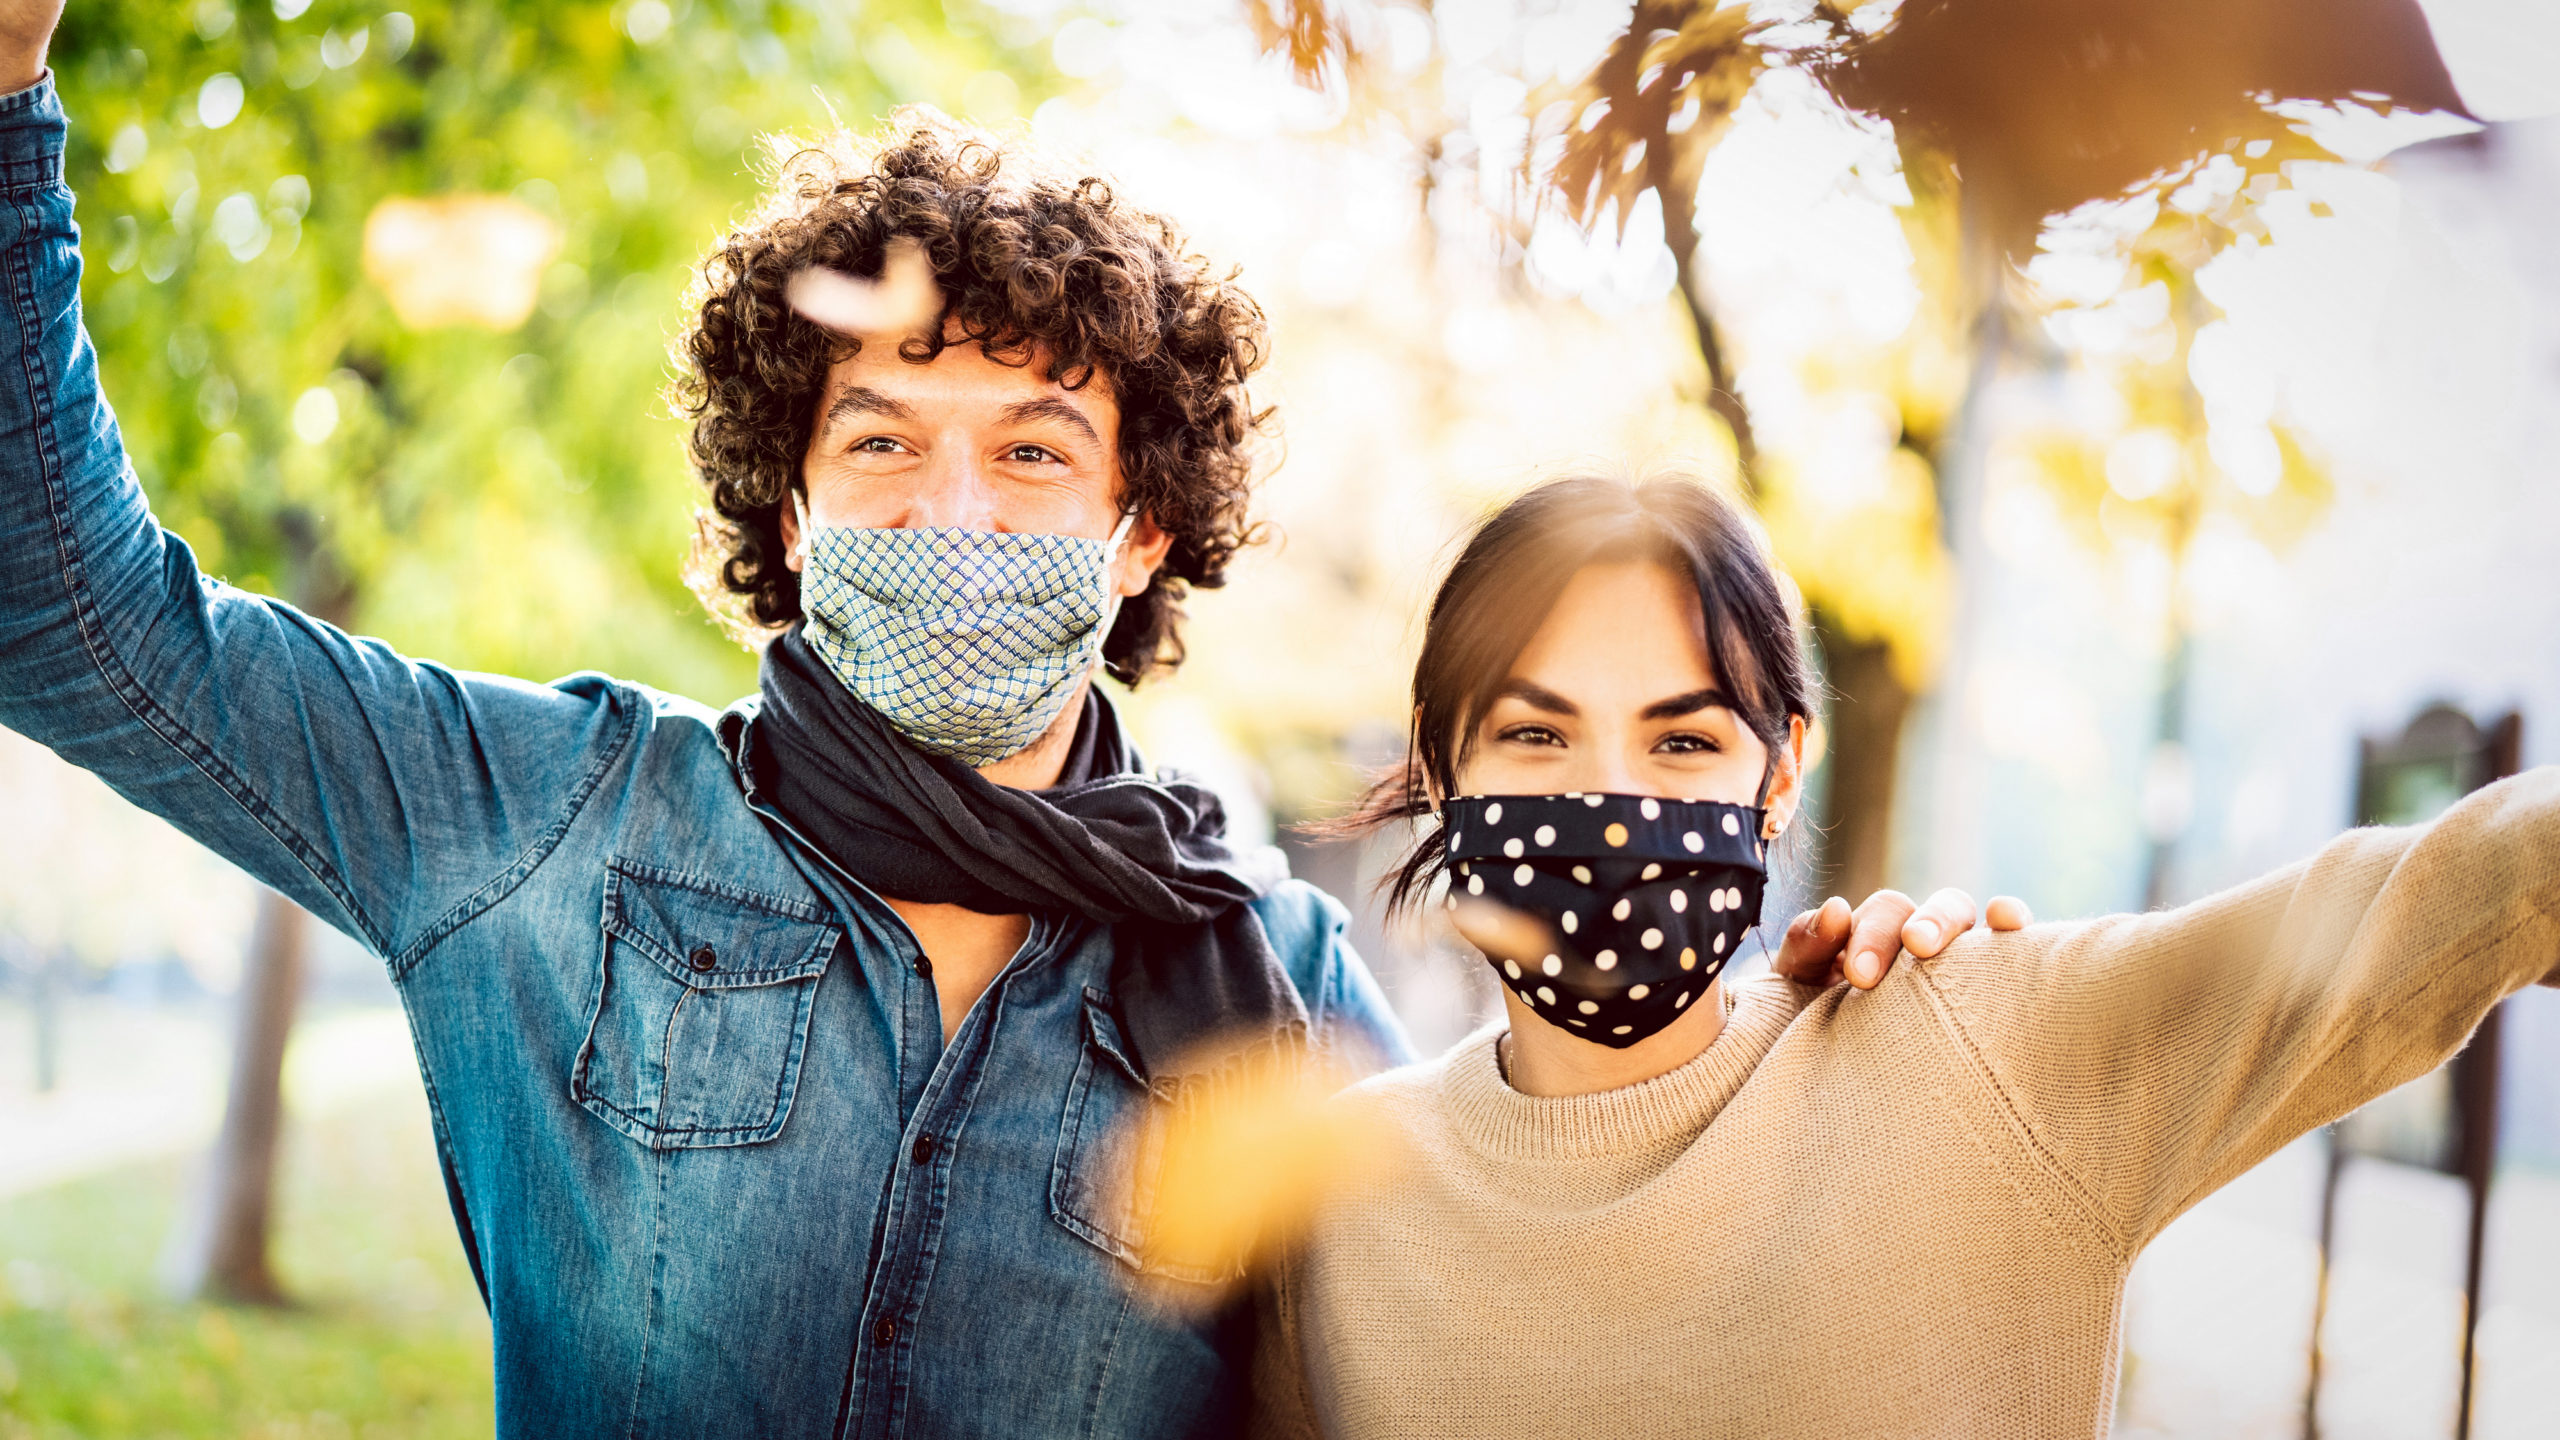 Happy couple of lovers enjoying autumn travel time outdoor wearing protective mask - New normal love concept with boyfriend and girlfriend having fun together